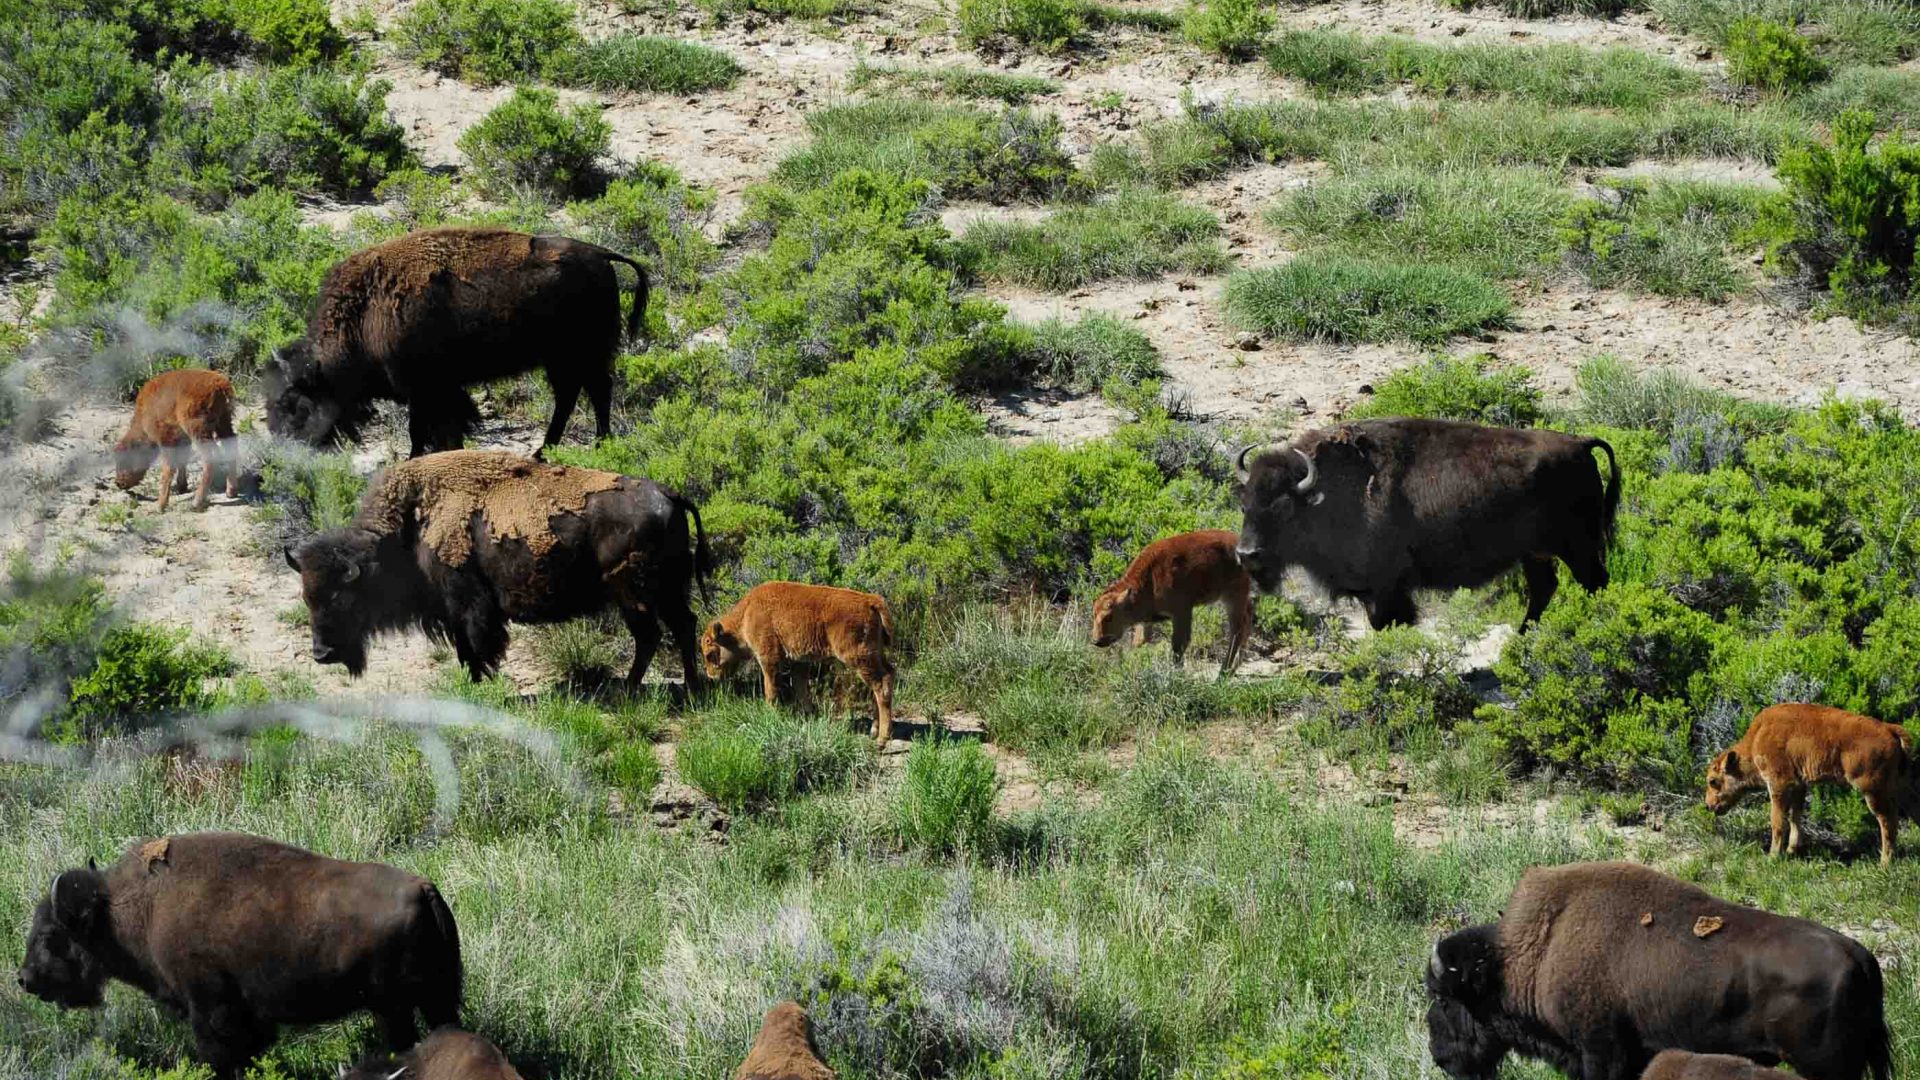 Several bison are seen from above crossing over grass.